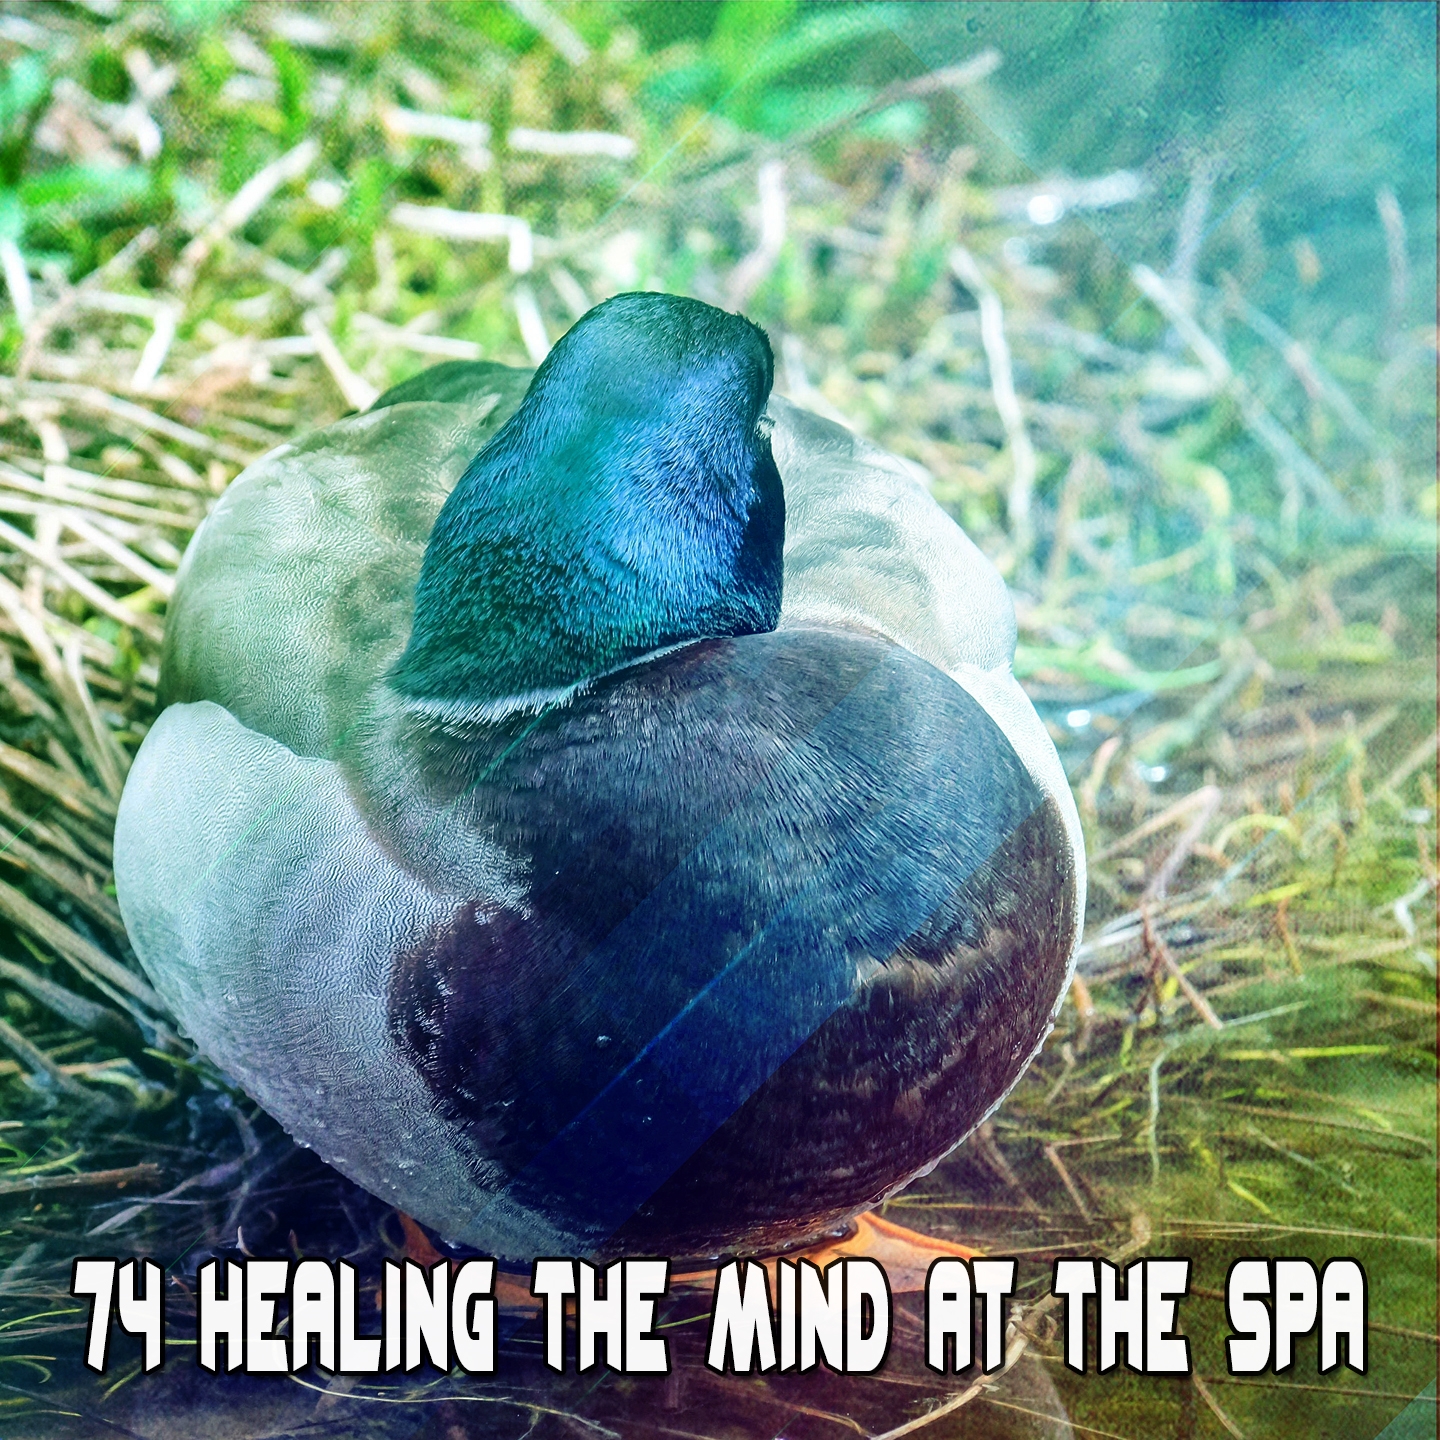 74 Healing The Mind At The Spa